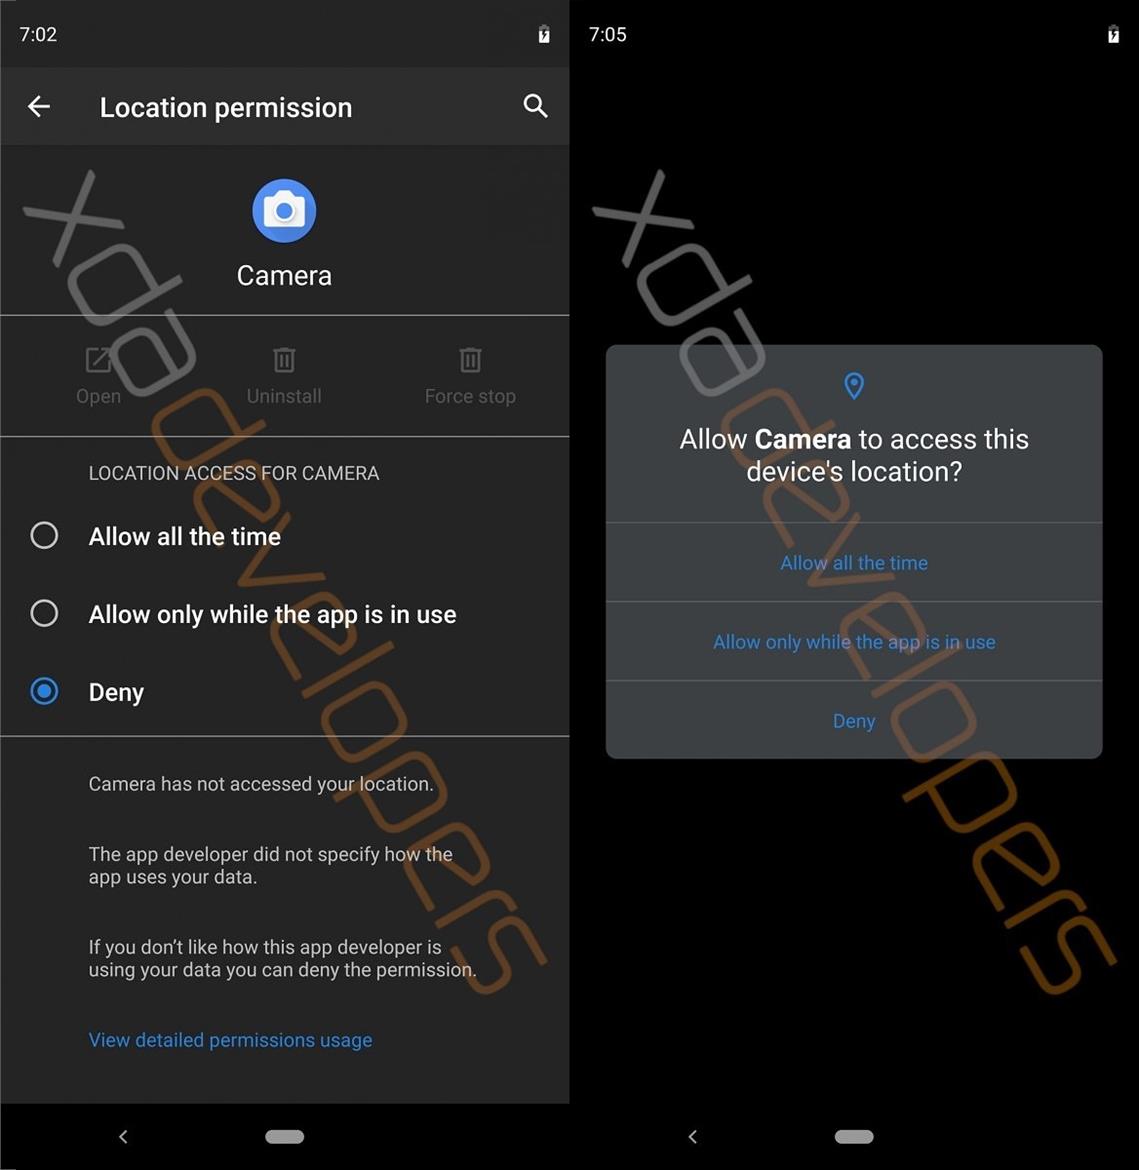 Google Android Q Leaks With System-Wide Dark Mode And Revamped Location Permissions